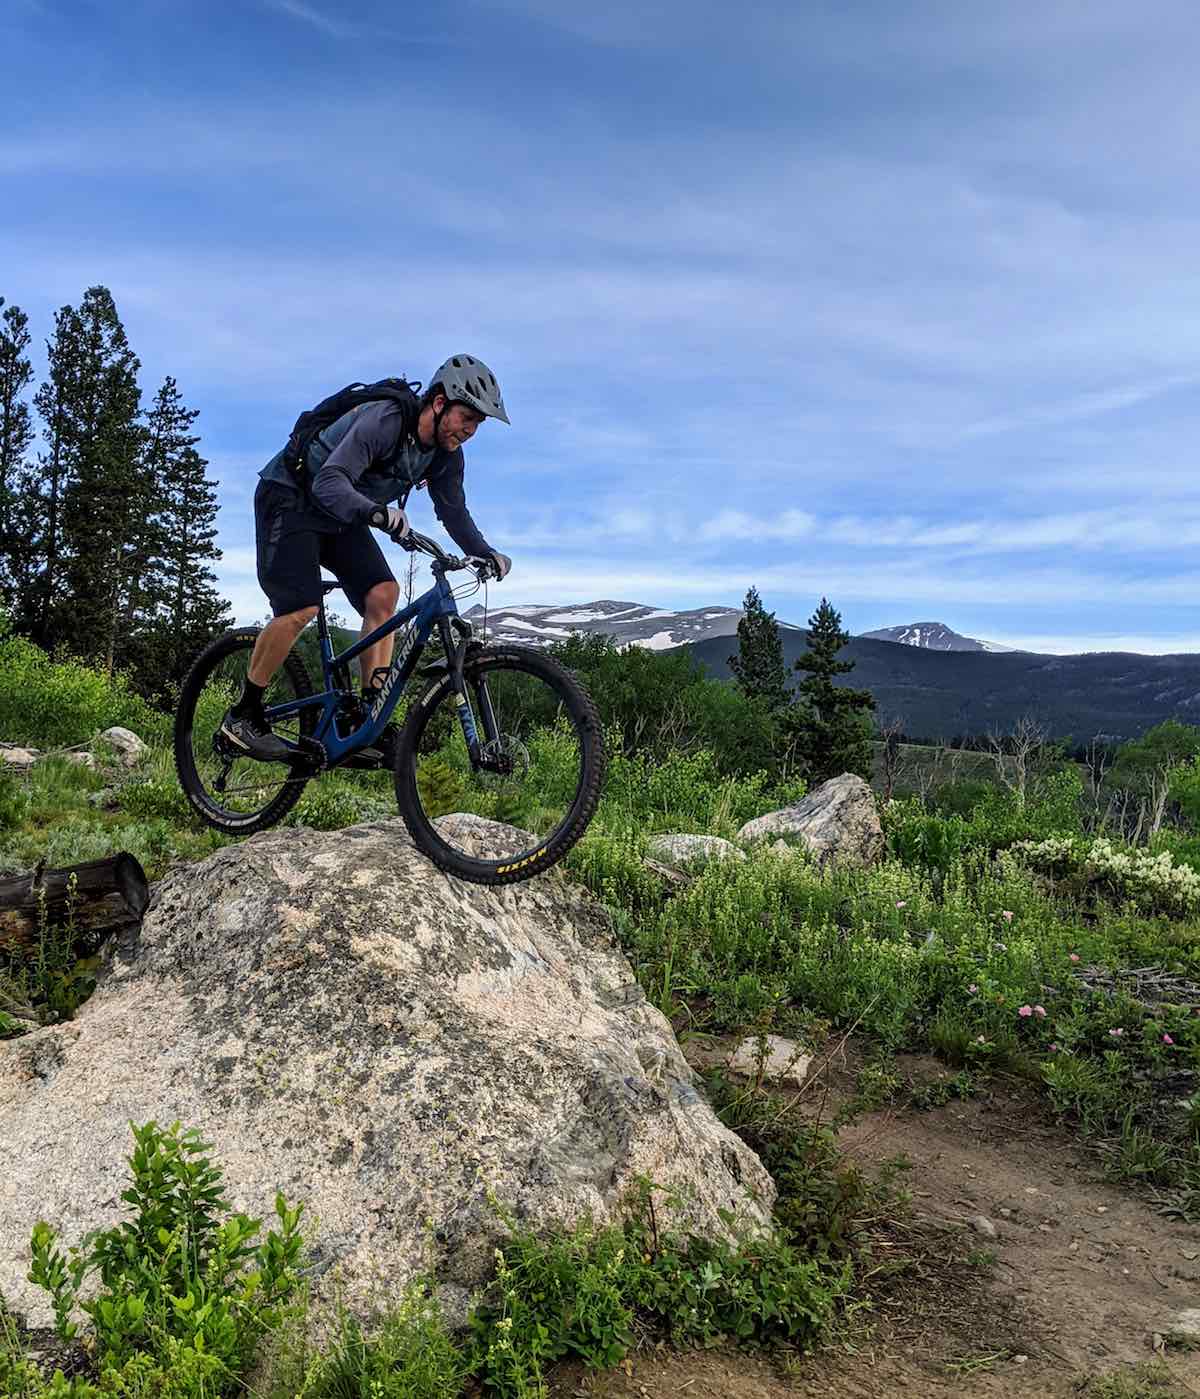 bikerumor pic of the day nederland colorado mountain biker descending a large boulder with a dirt trail and green fields beyond.